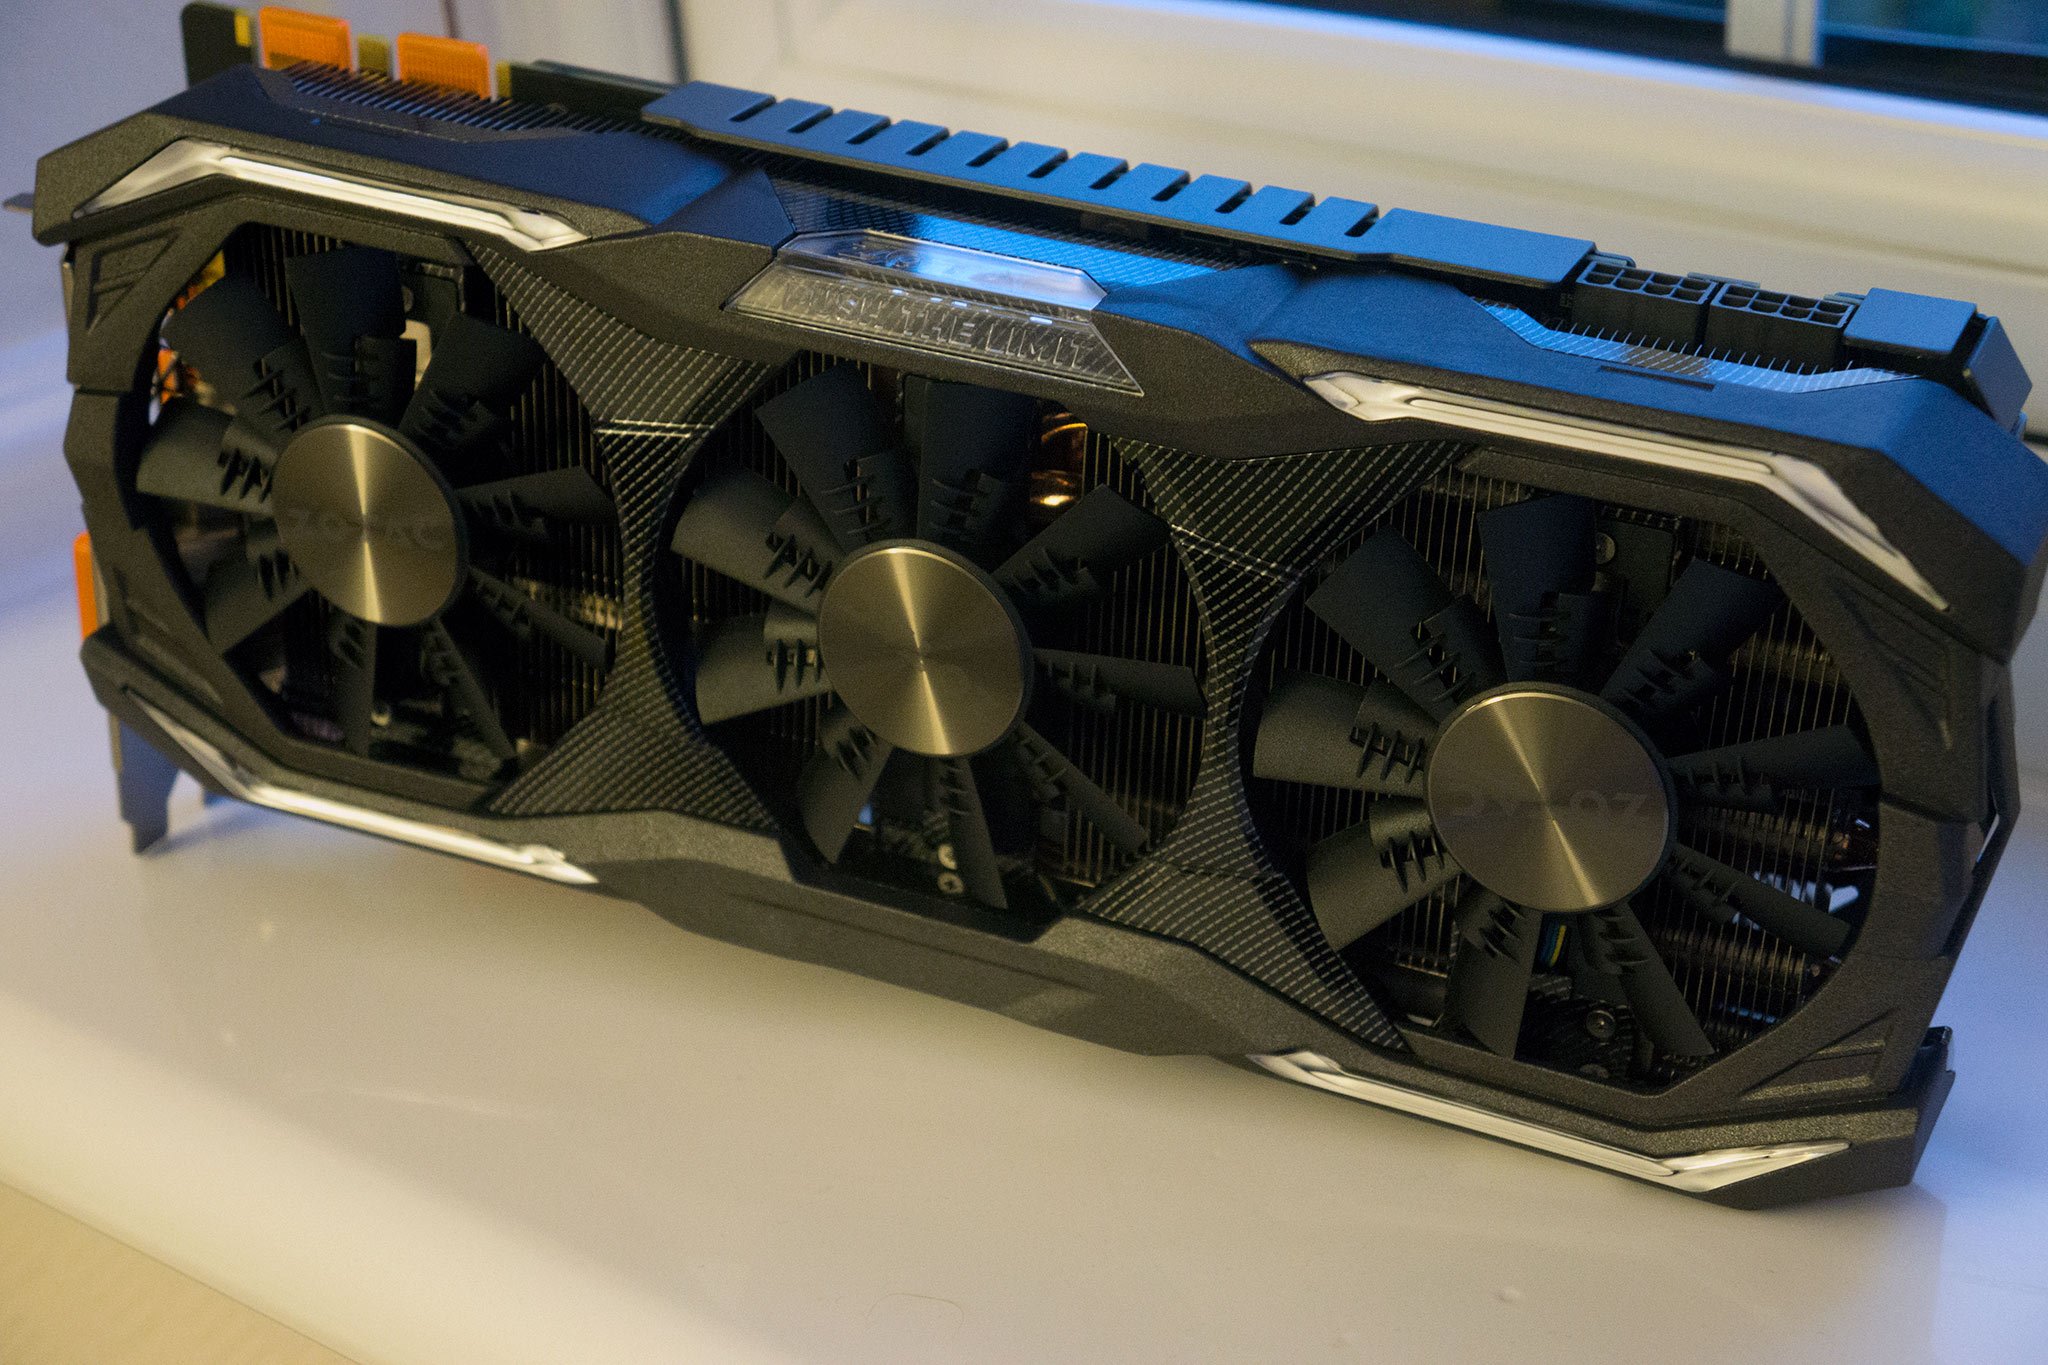 ZOTAC's NVIDIA GTX 1070 AMP! Extreme is an absolute beast of a GPU